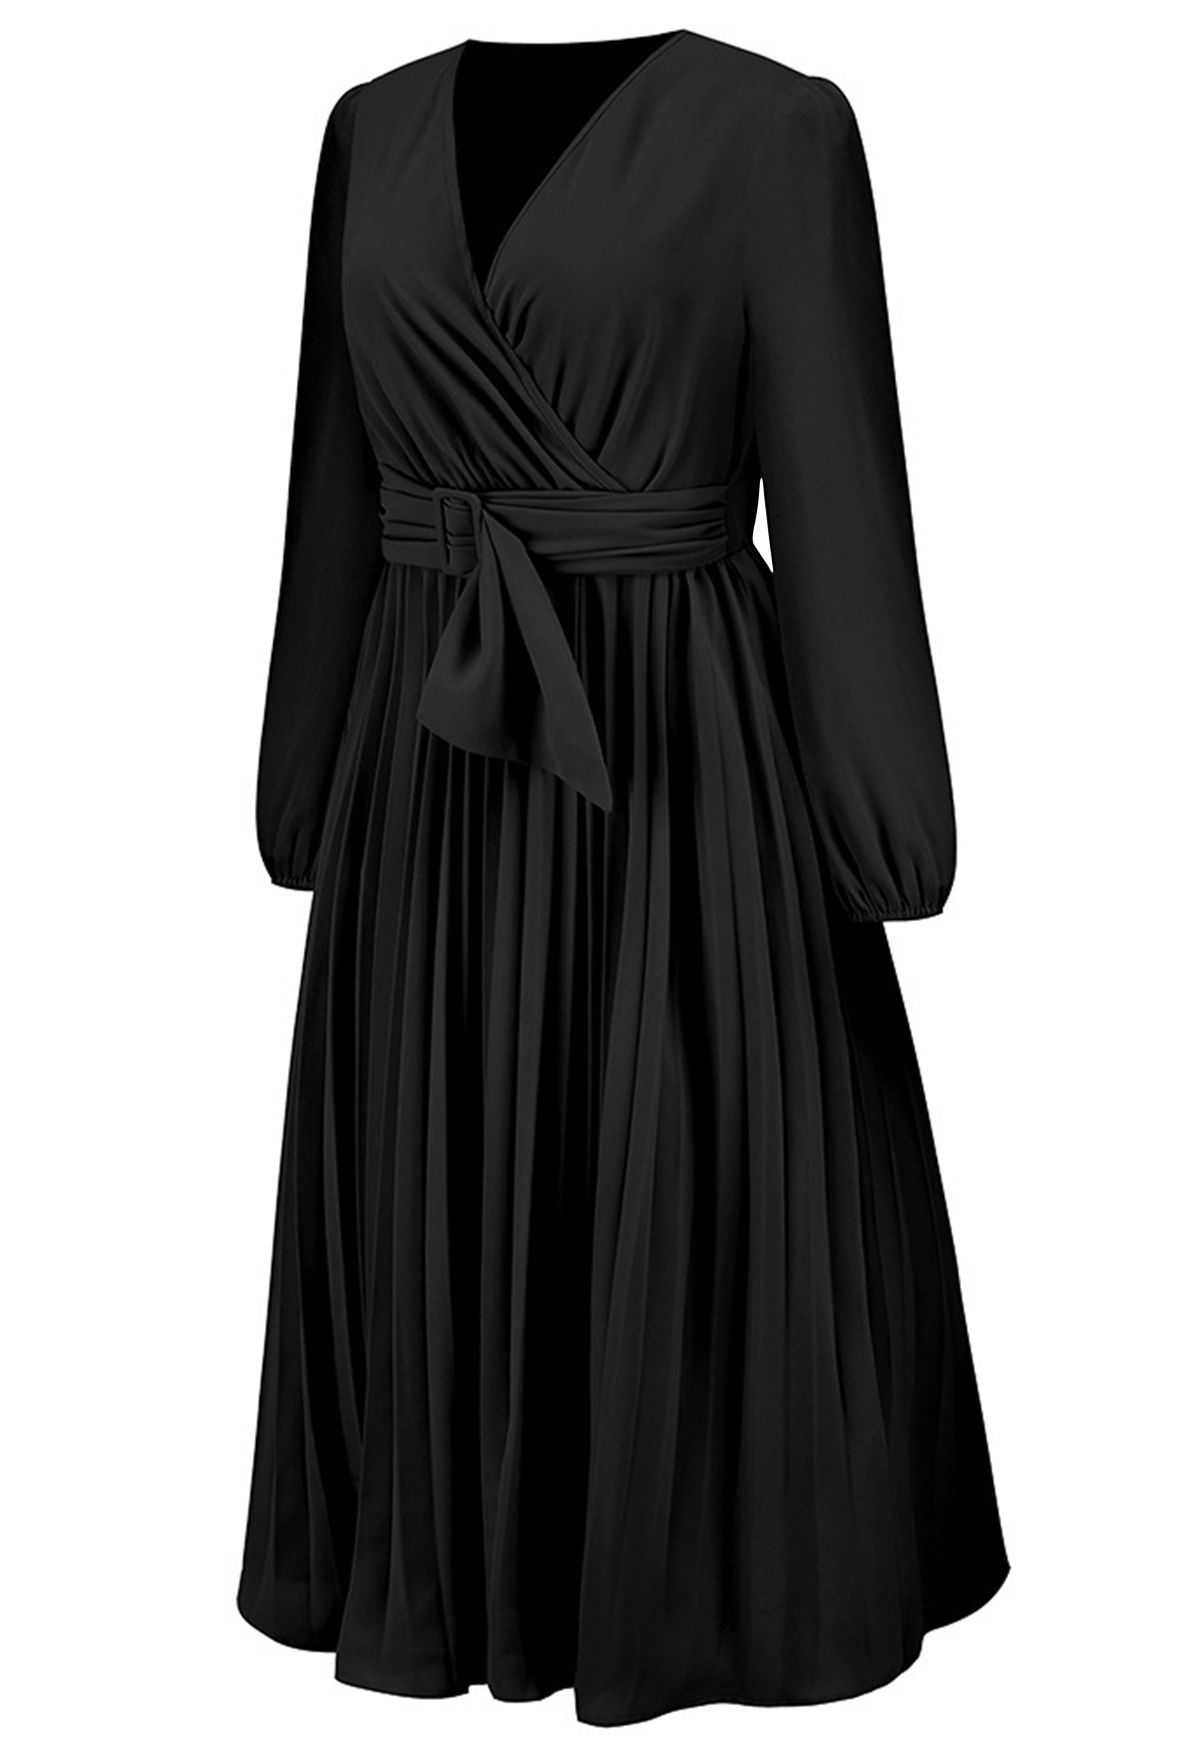 Wrap Front Buckle Belt Dress in Black - Retro, Indie and Unique Fashion